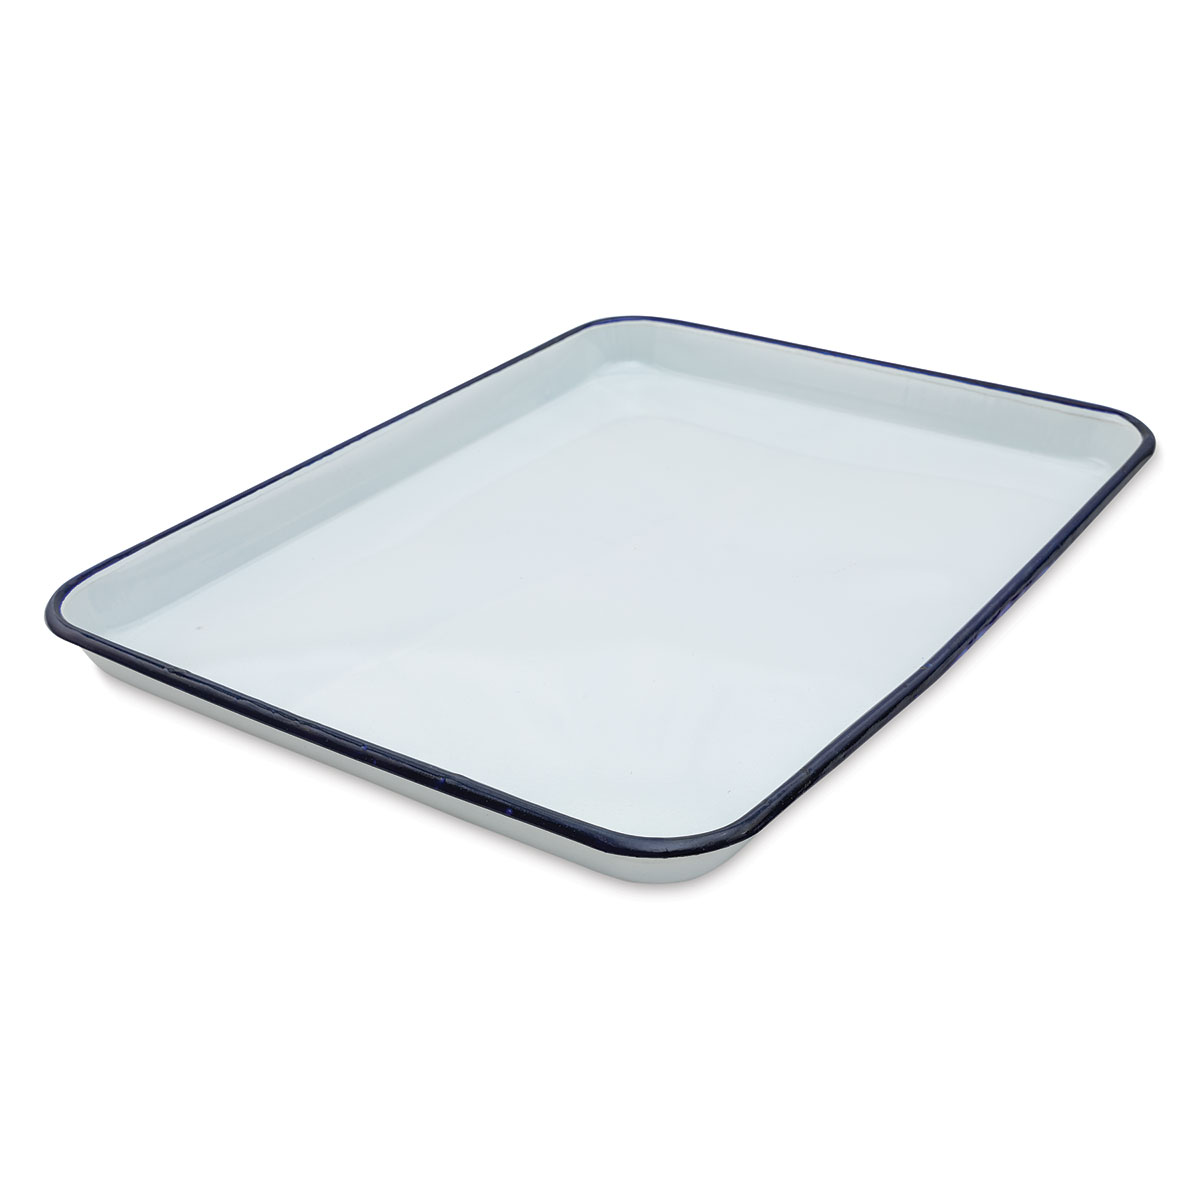 Jack Richeson Butcher Tray Palette, 7-1/2 x 11 in, Porcelain On Steel, White